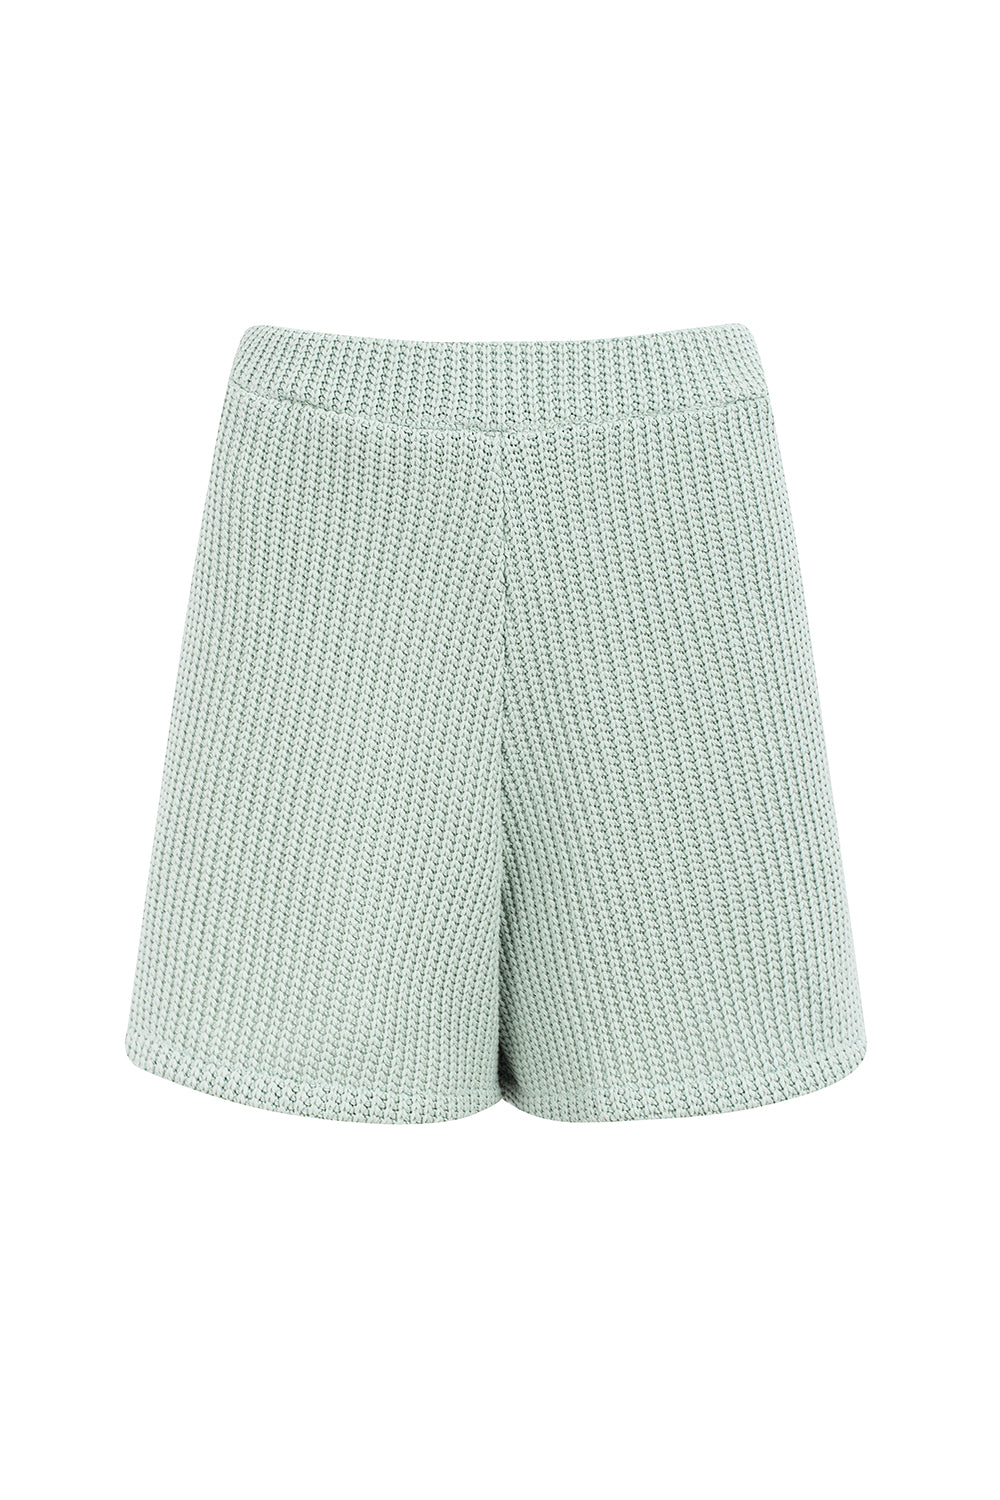 MINT RIBBED KNIT SHORTS – Missus